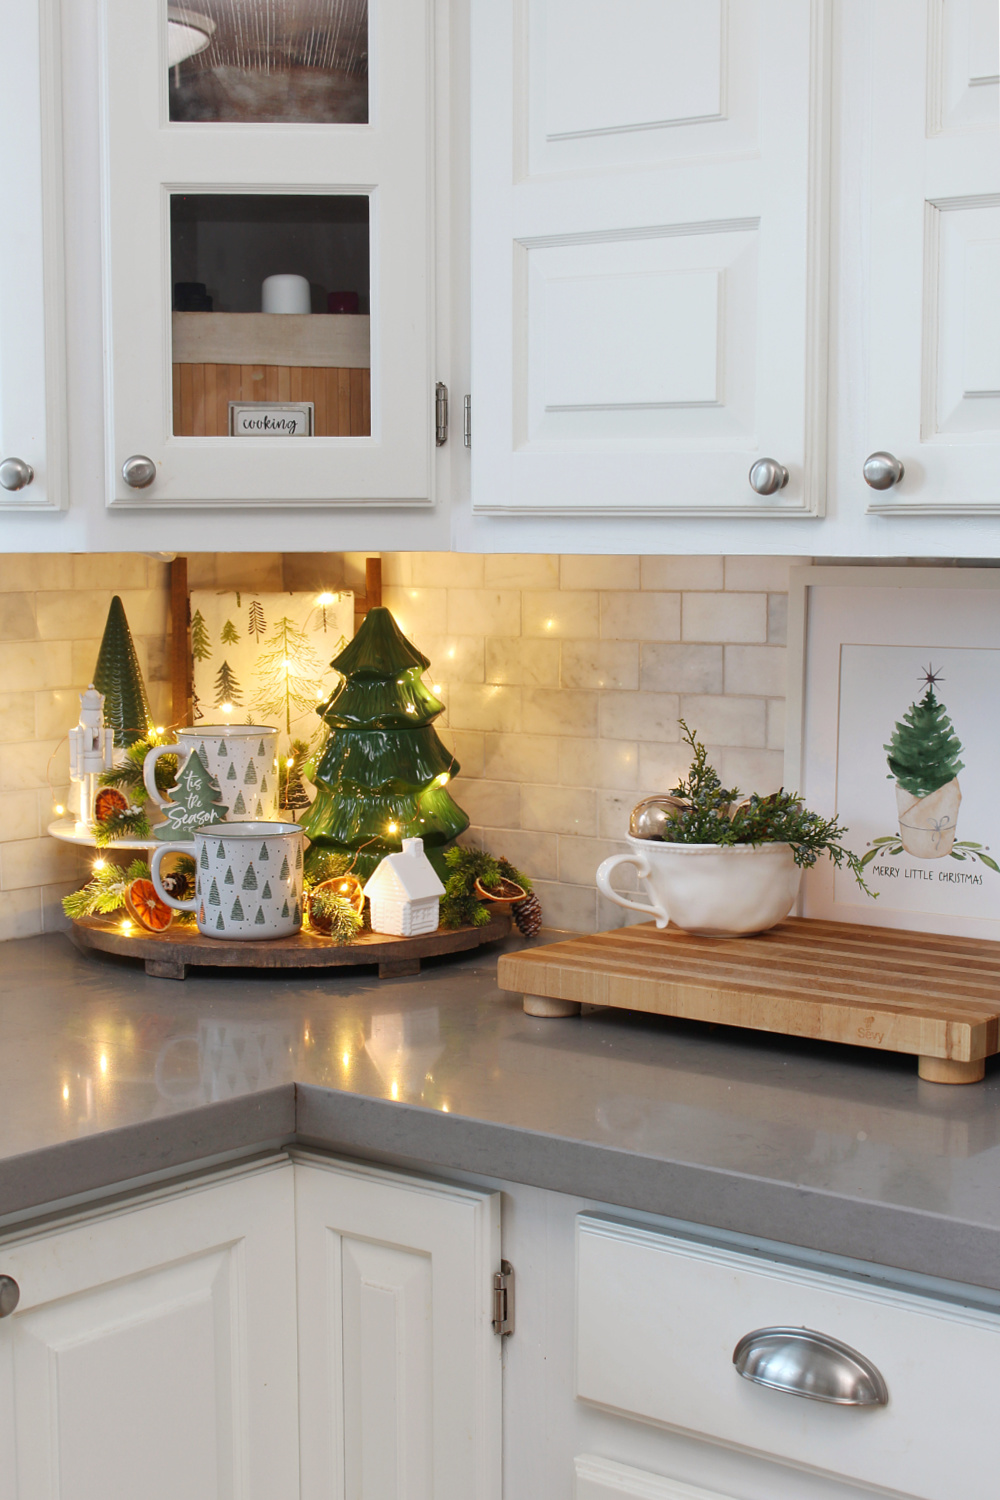 https://www.cleanandscentsible.com/wp-content/uploads/2022/12/Green-and-white-Christmas-kitchen-Clean-and-Scentsible-lights.jpg